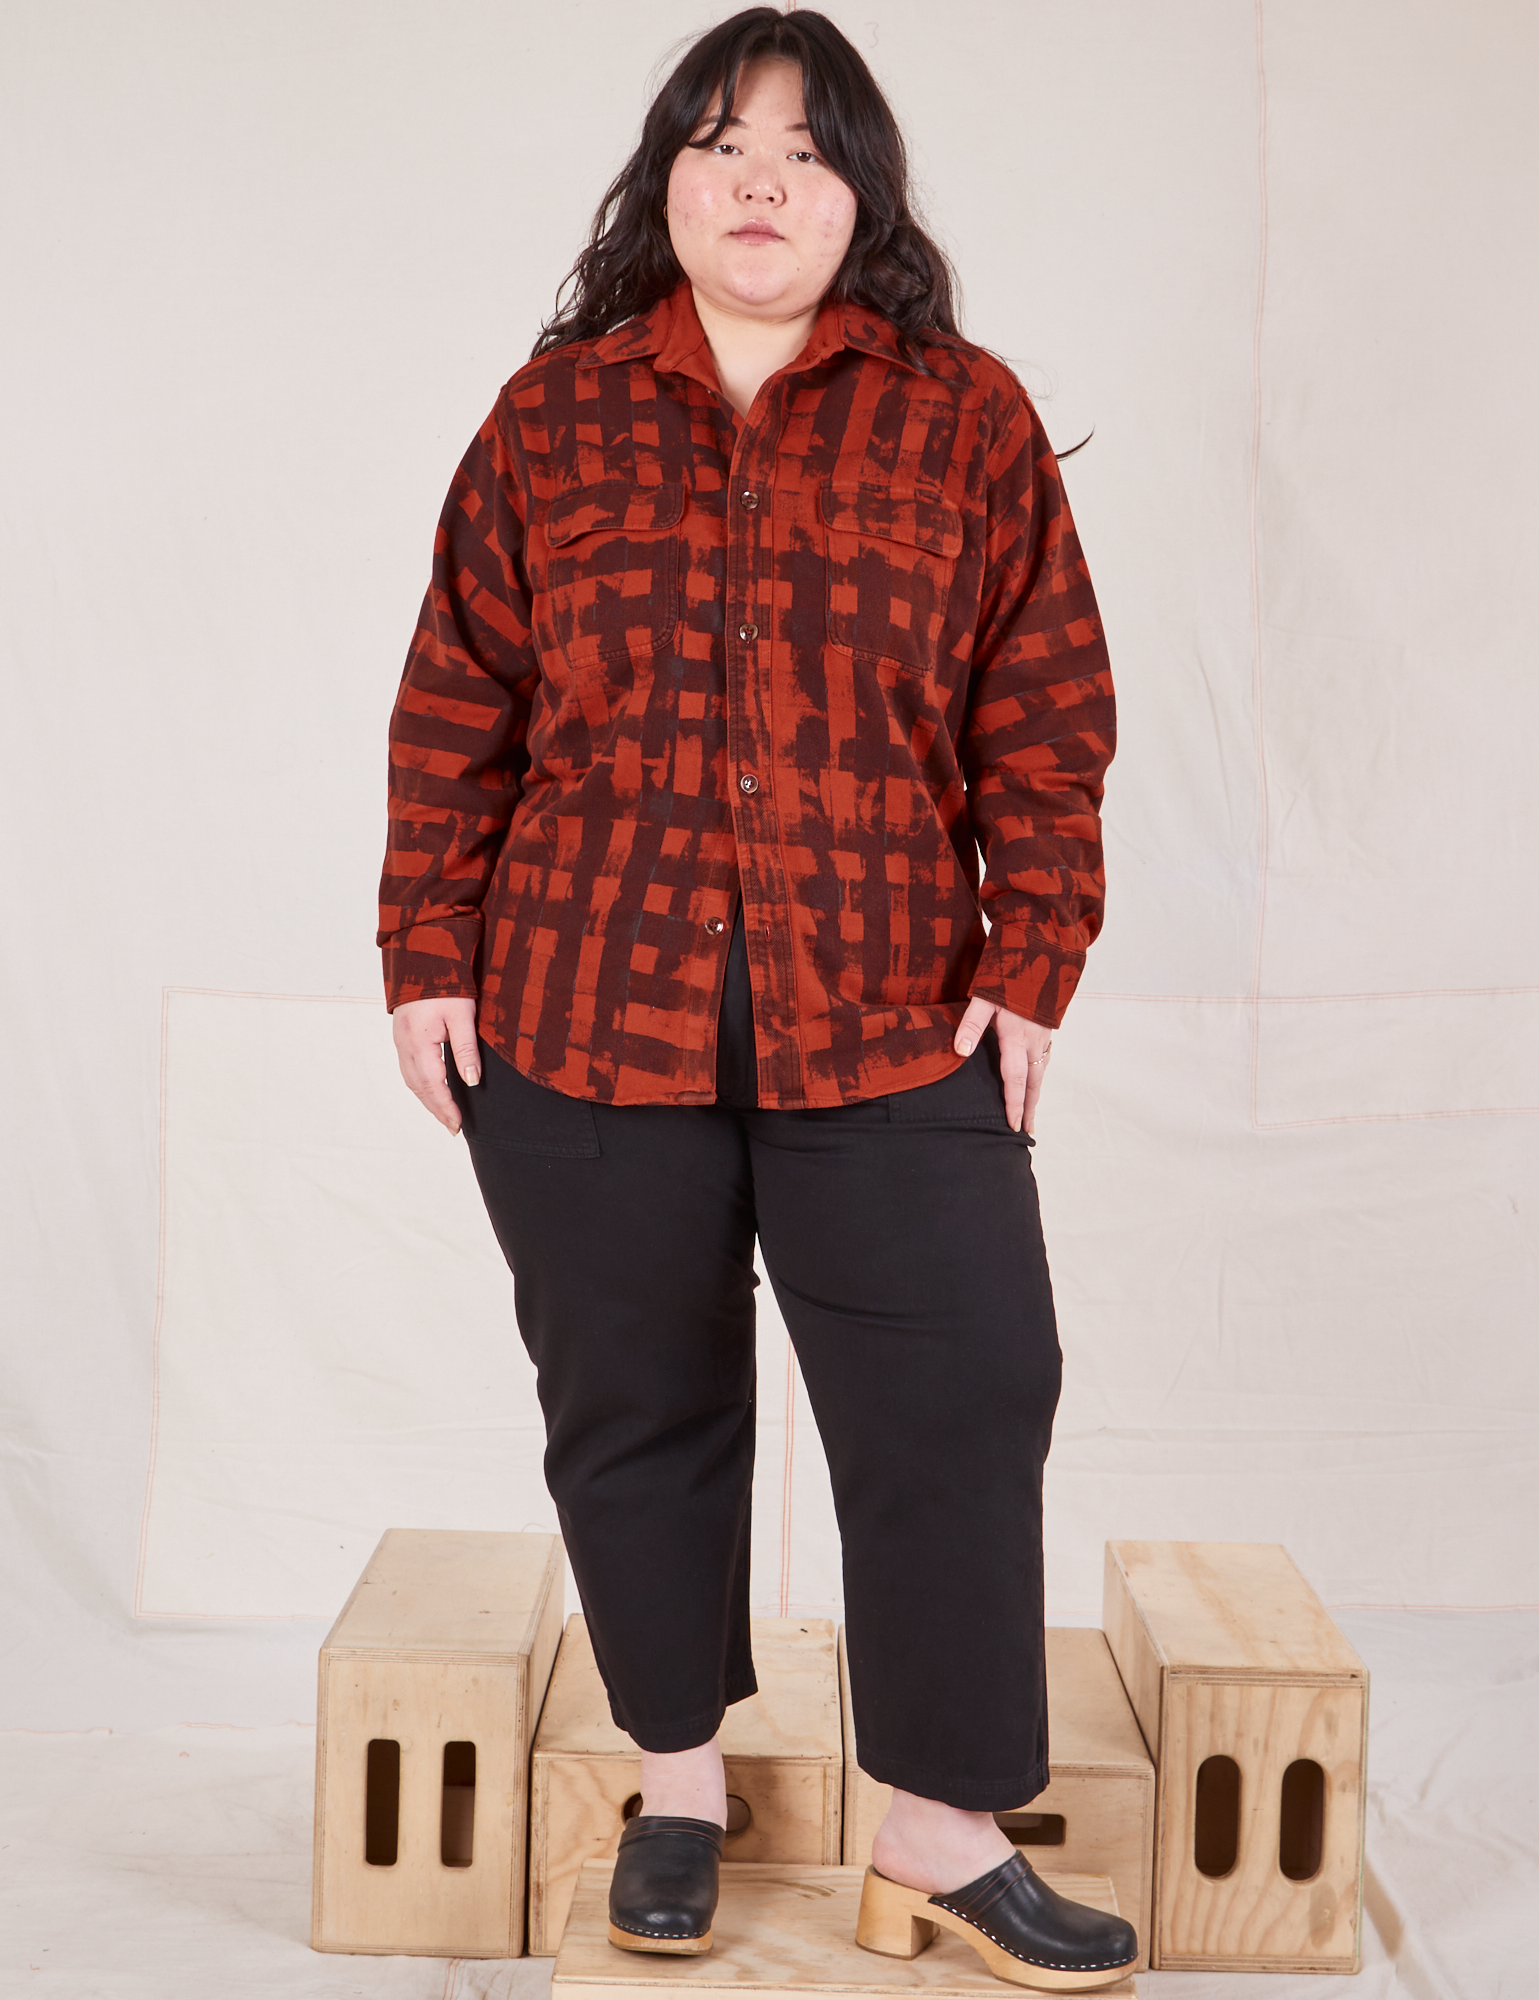 Ashley is wearing a buttoned up Plaid Flannel Overshirt in Paprika paired with black Work Pants